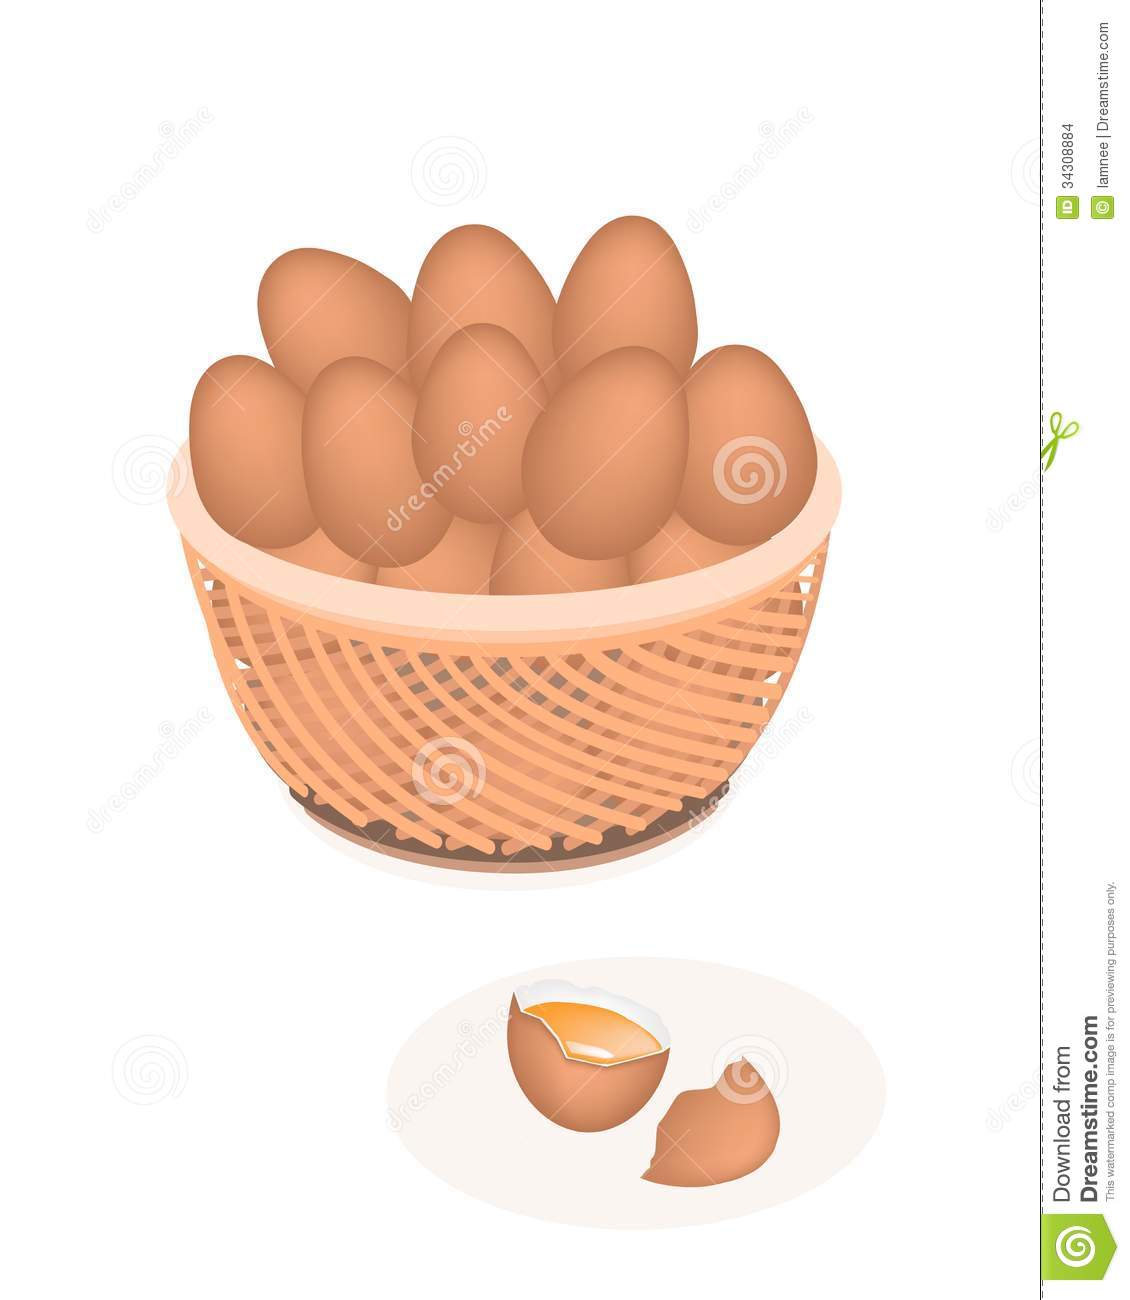 Chicken Eggs In A Wicker Basket And Cracked Egg On White Backgrounds